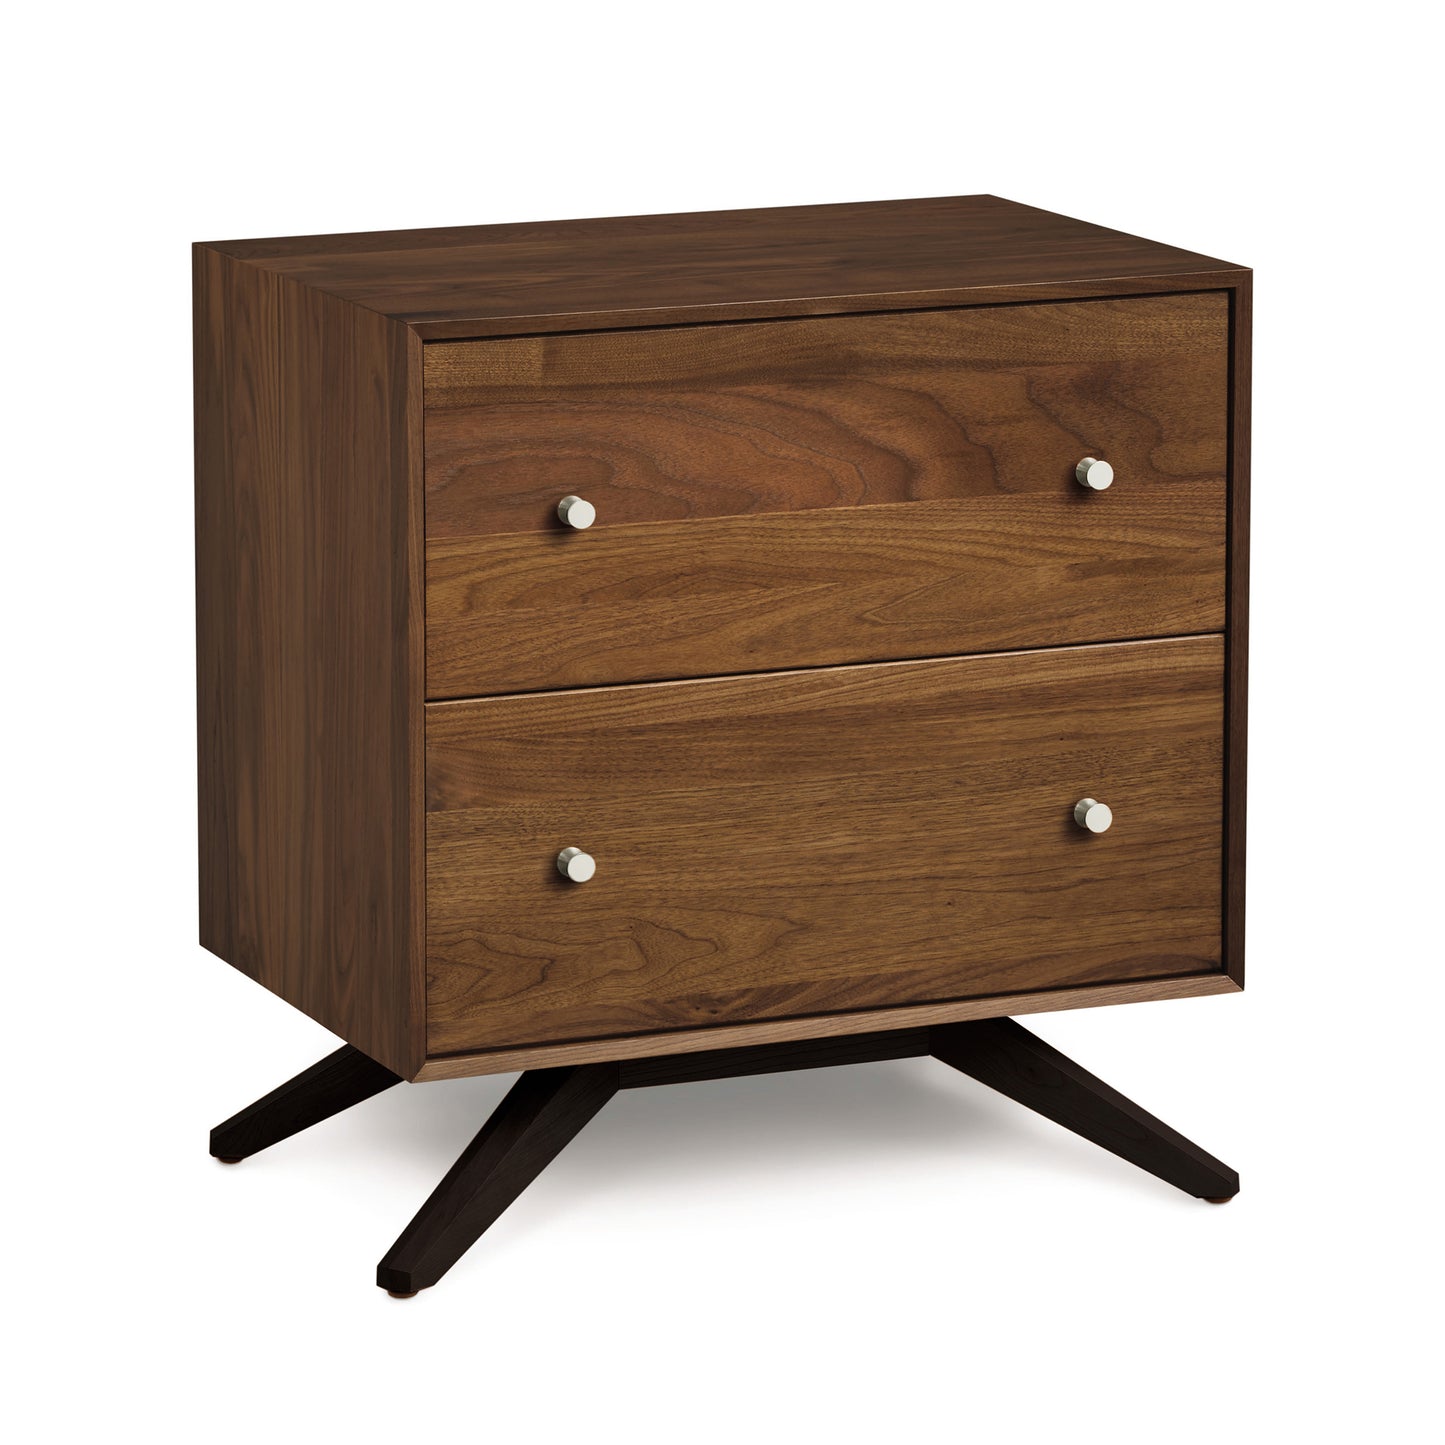 An Astrid 2-Drawer Nightstand by Copeland Furniture, with splayed legs and a contemporary design, perfect for enhancing any modern or contemporary bedroom.